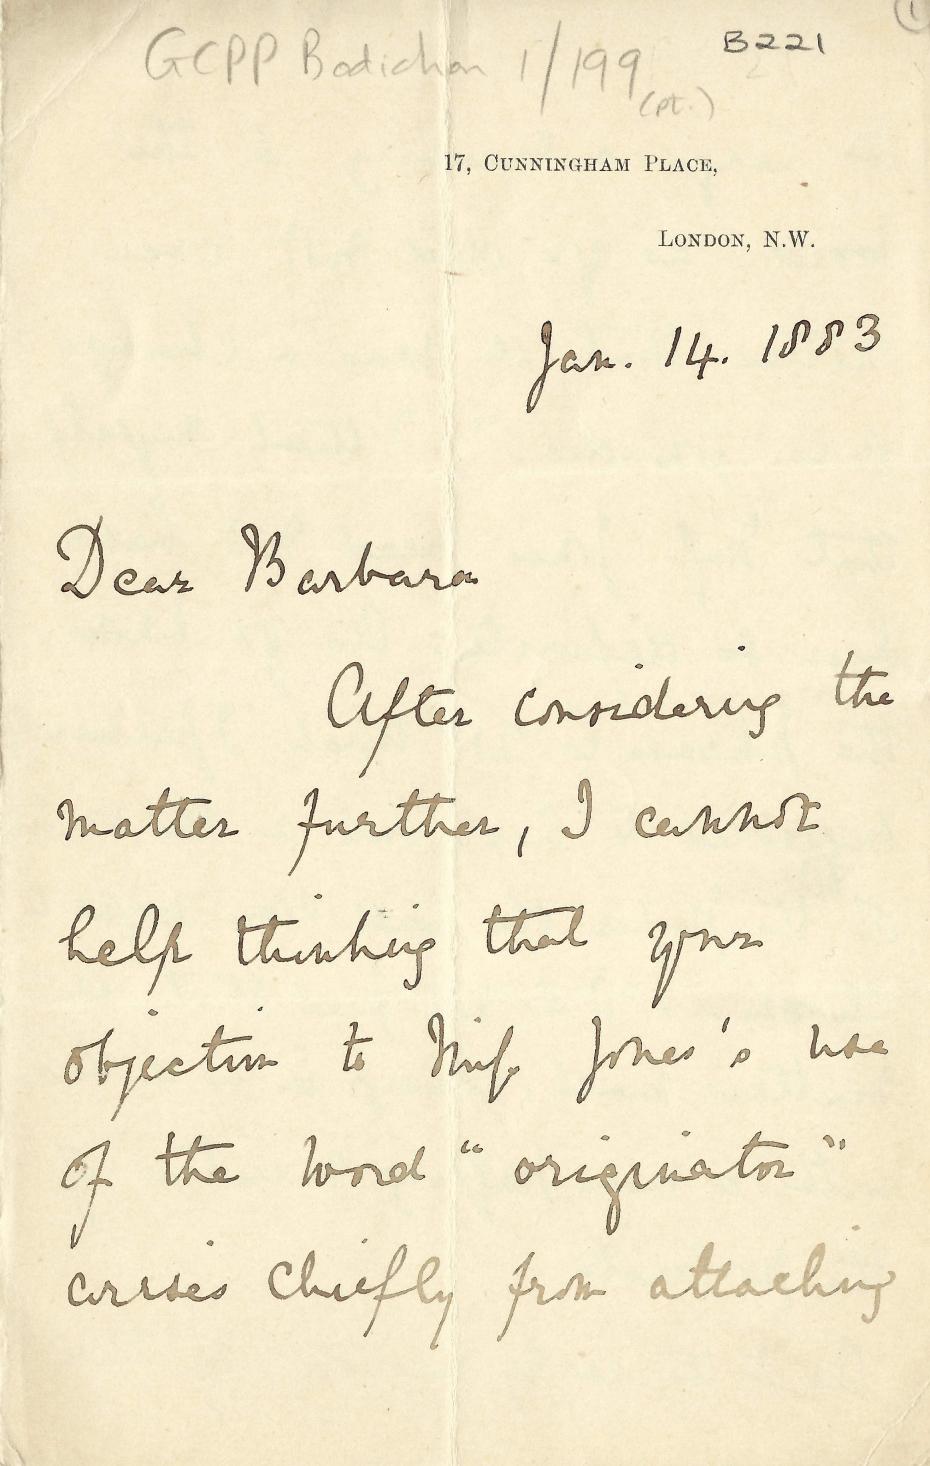 Part of a letter from Emily to Barbara Bodichon, regarding the issue of Emily being called the ‘originator’ of the College, 14 January 1883 (archive (archive reference: GCPP Bodichon 1/199pt).